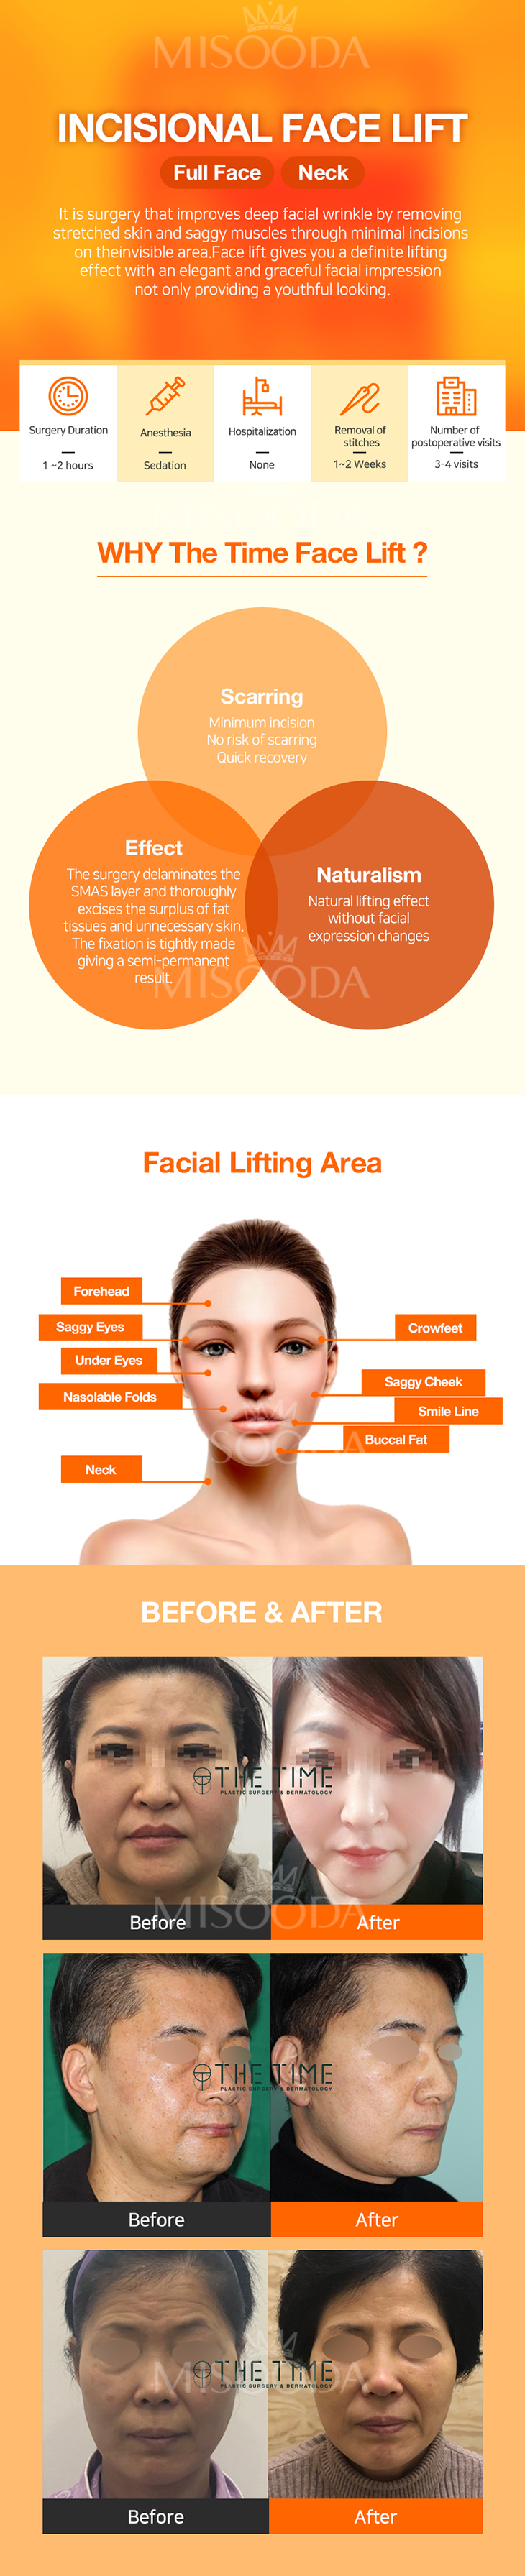 Incisional Face Lift